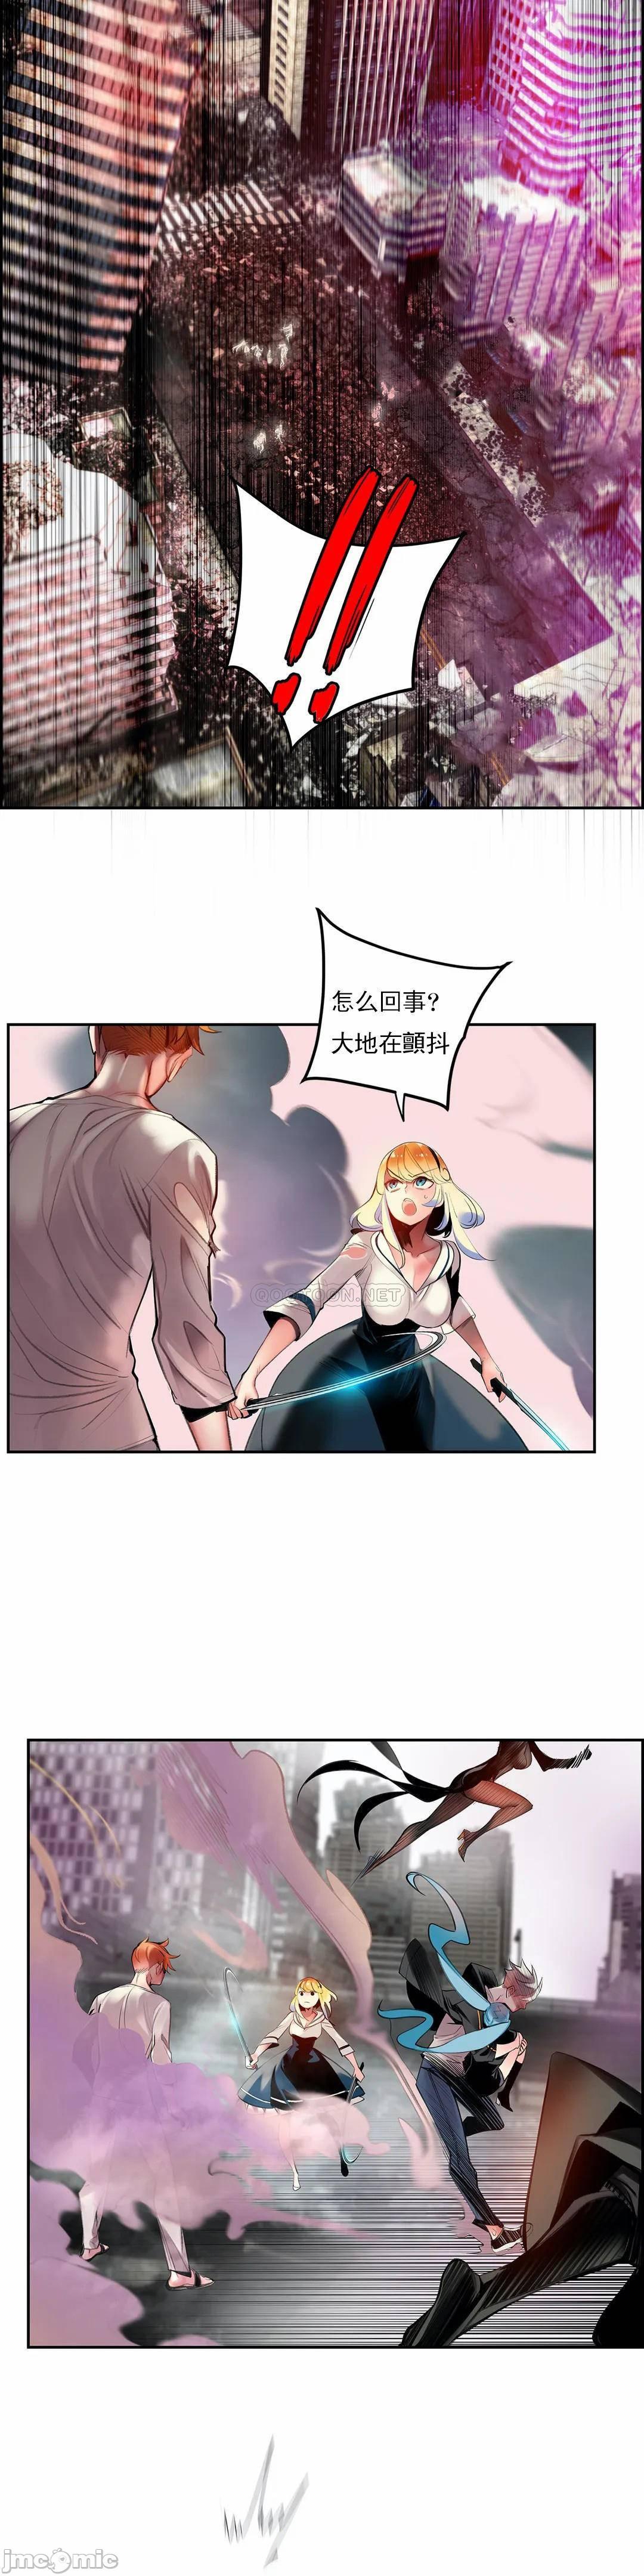 [Juder] Lilith`s Cord (第二季) Ch.77-93 end [Chinese] 360